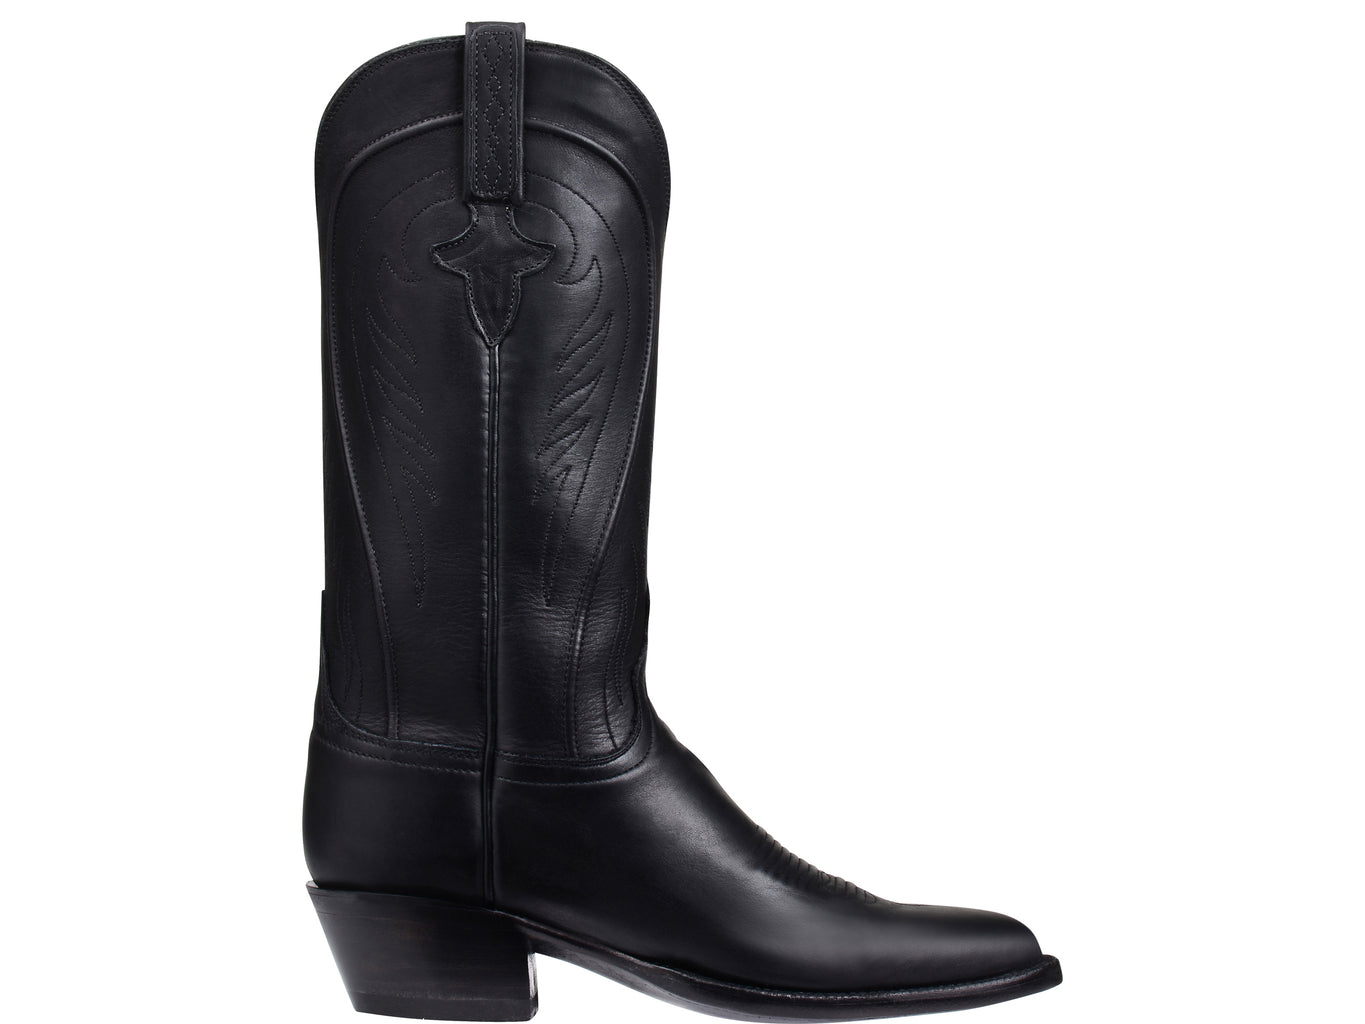 lucchese 2 women's boots